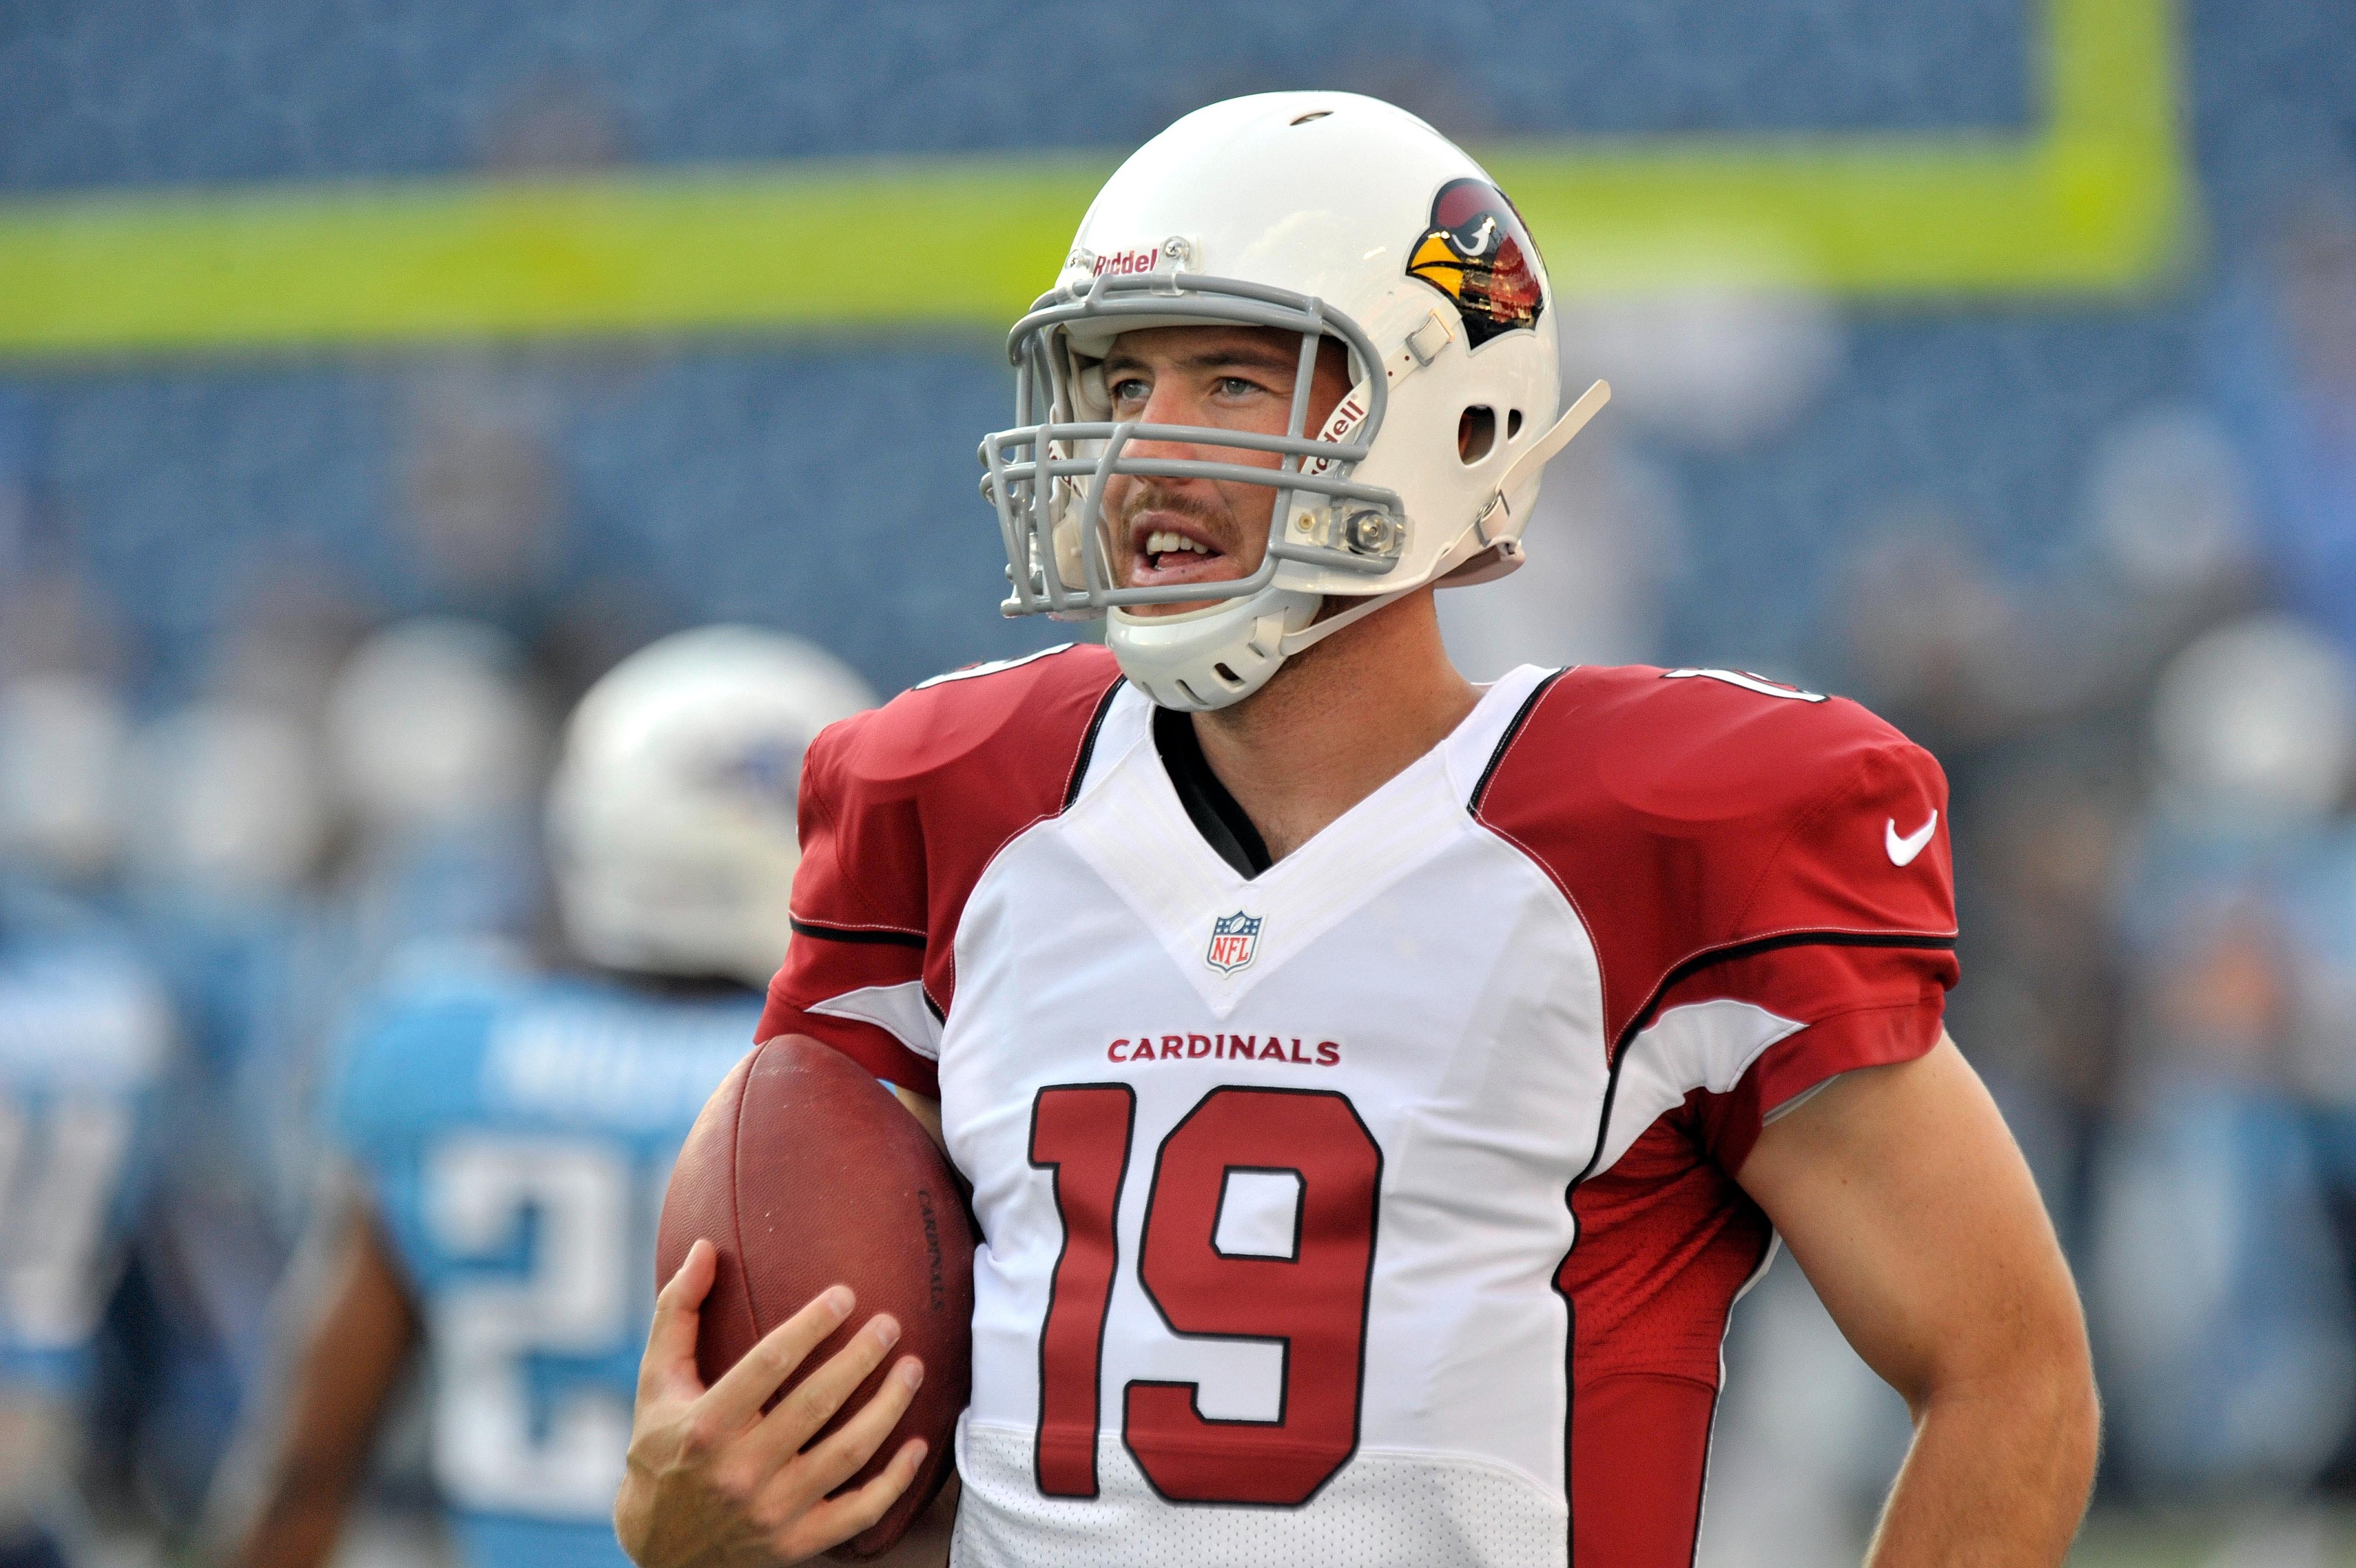 Aug 23, 2012; Nashville, TN, USA; Arizona Cardinals quarterback John Skelton (19) during warm up prior to the game against the Tennessee Titans at LP Field. Mandatory Credit: Jim Brown-US PRESSWIRE